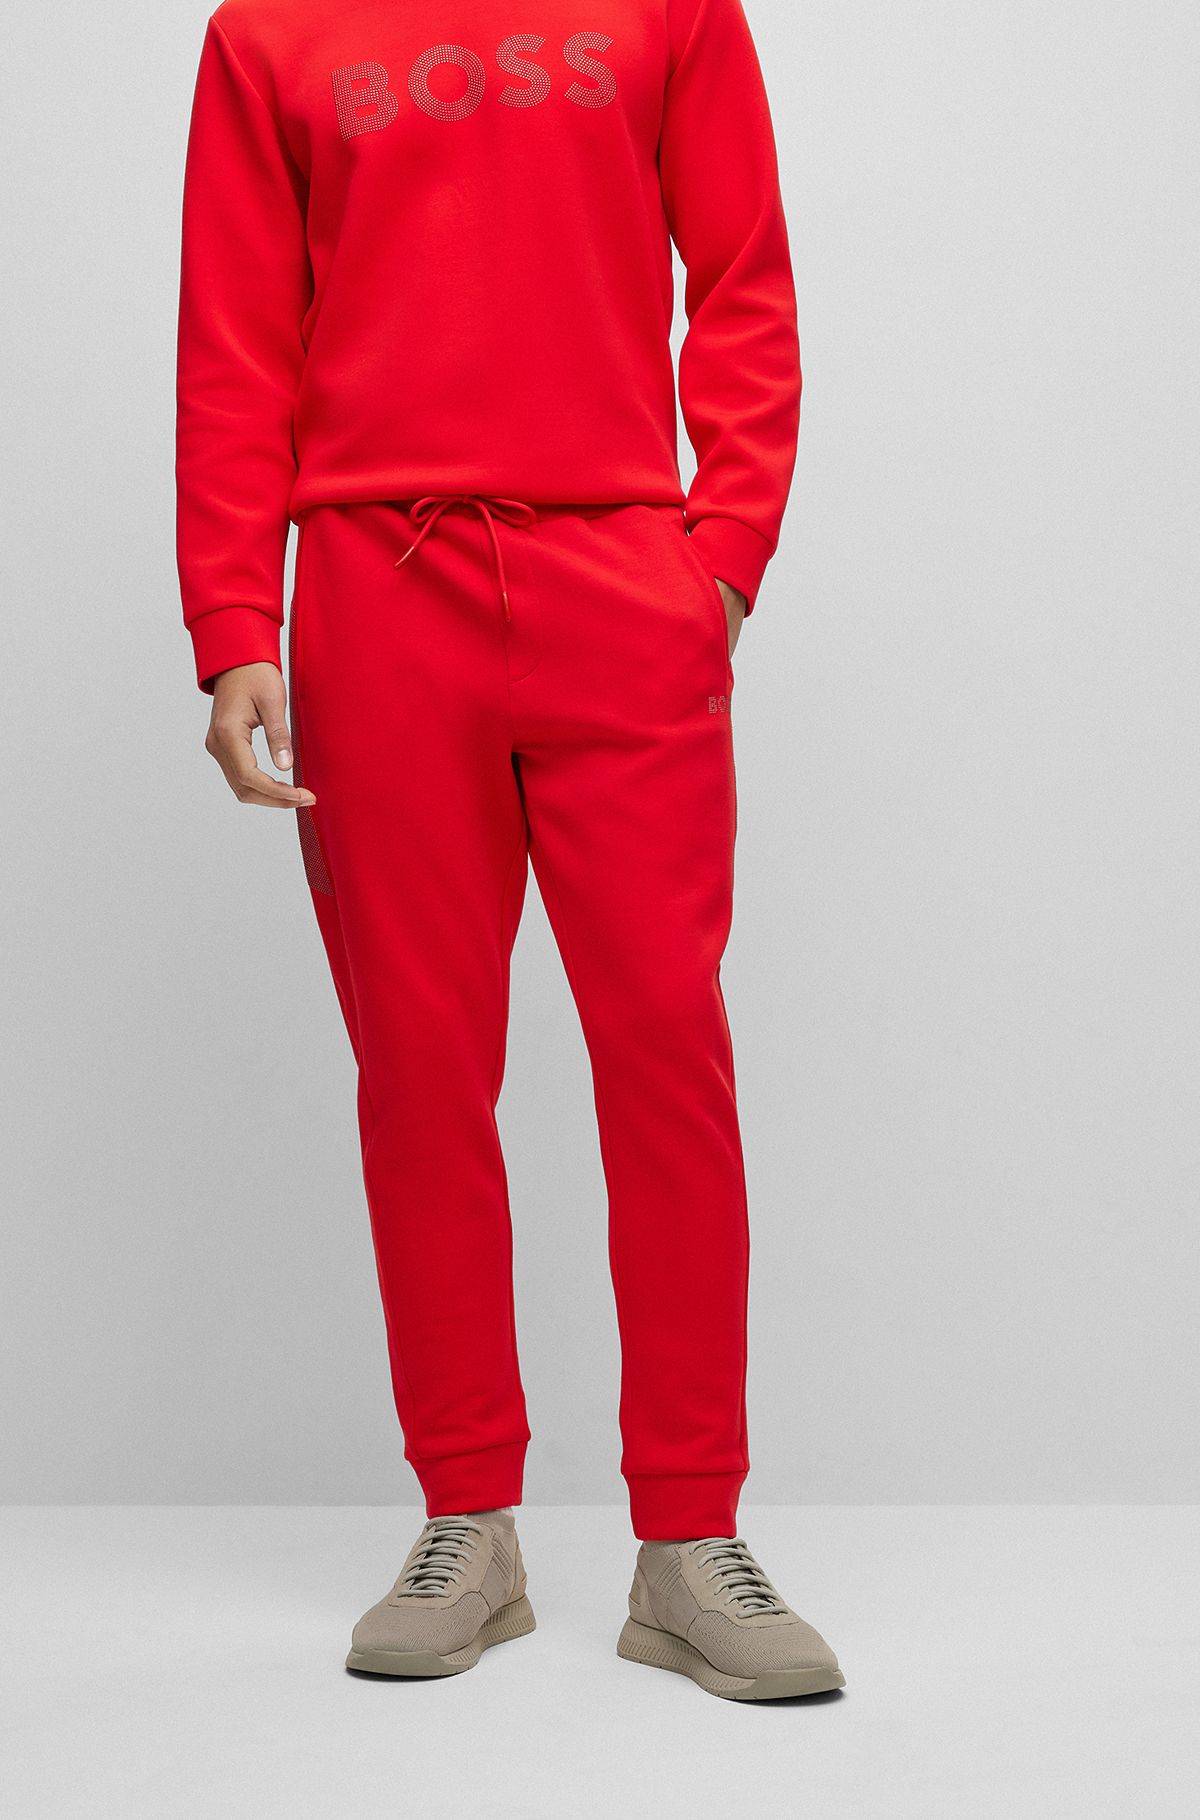 Red Joggers Pant at Rs 1099/piece in Mumbai